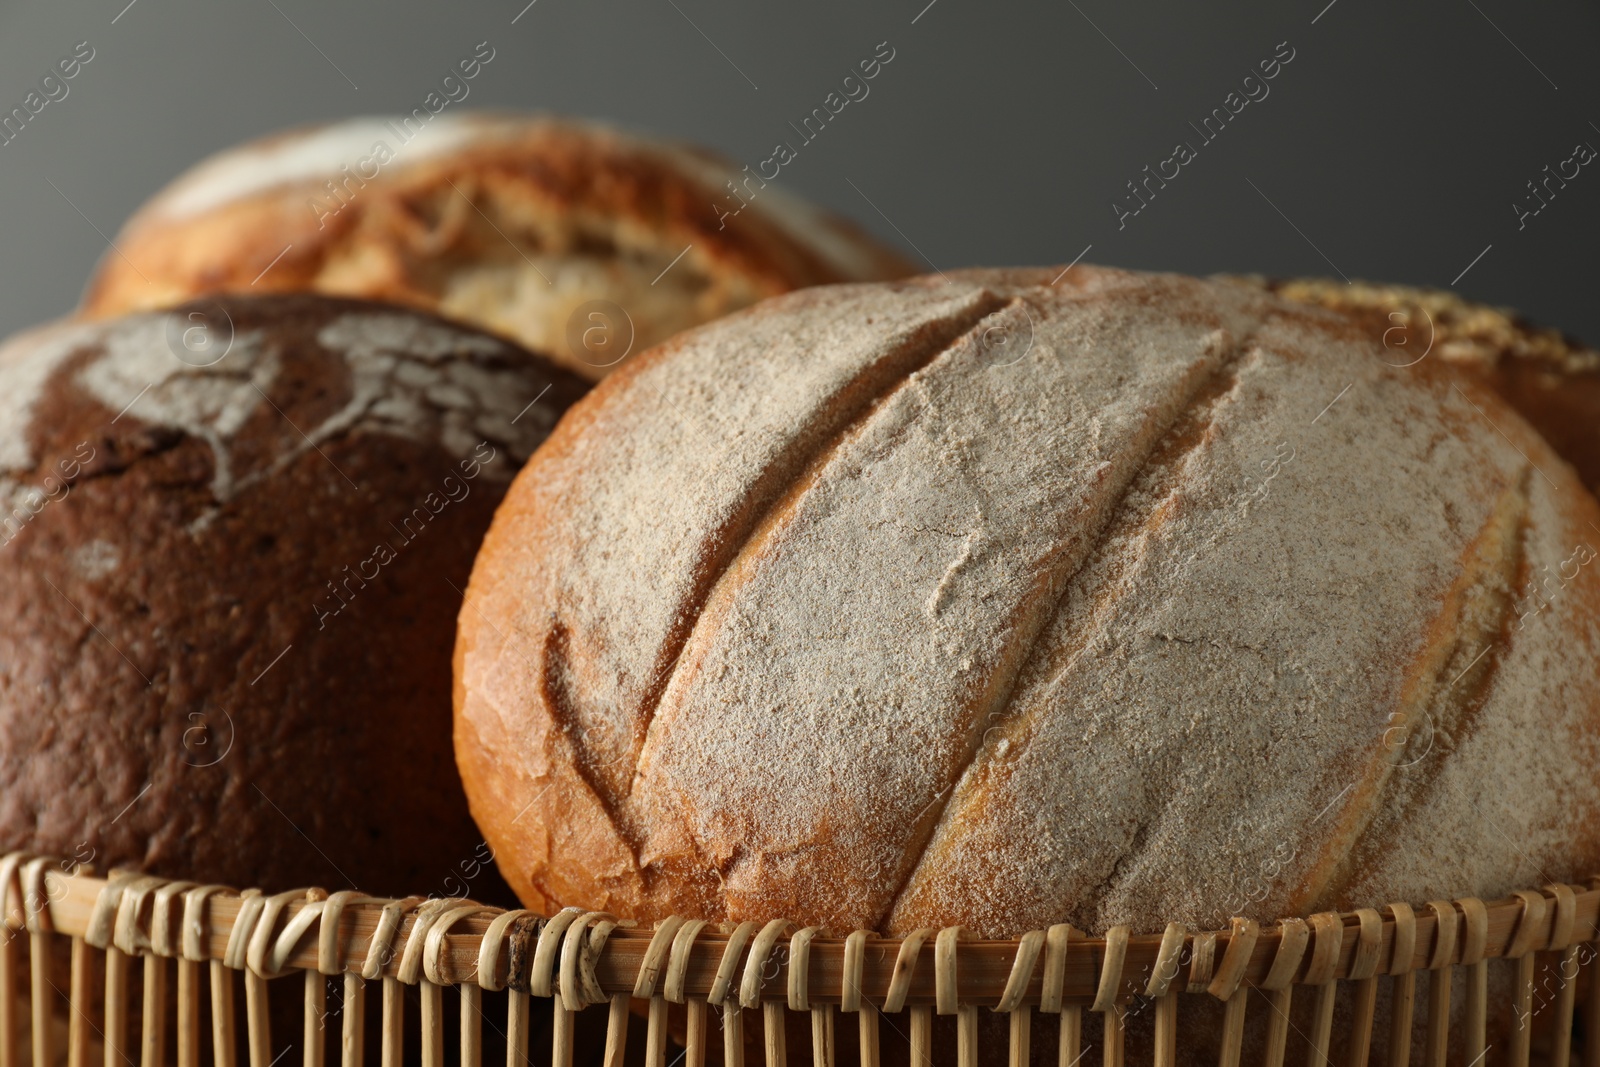 Photo of Wicker basket with different types of fresh bread against grey background, closeup